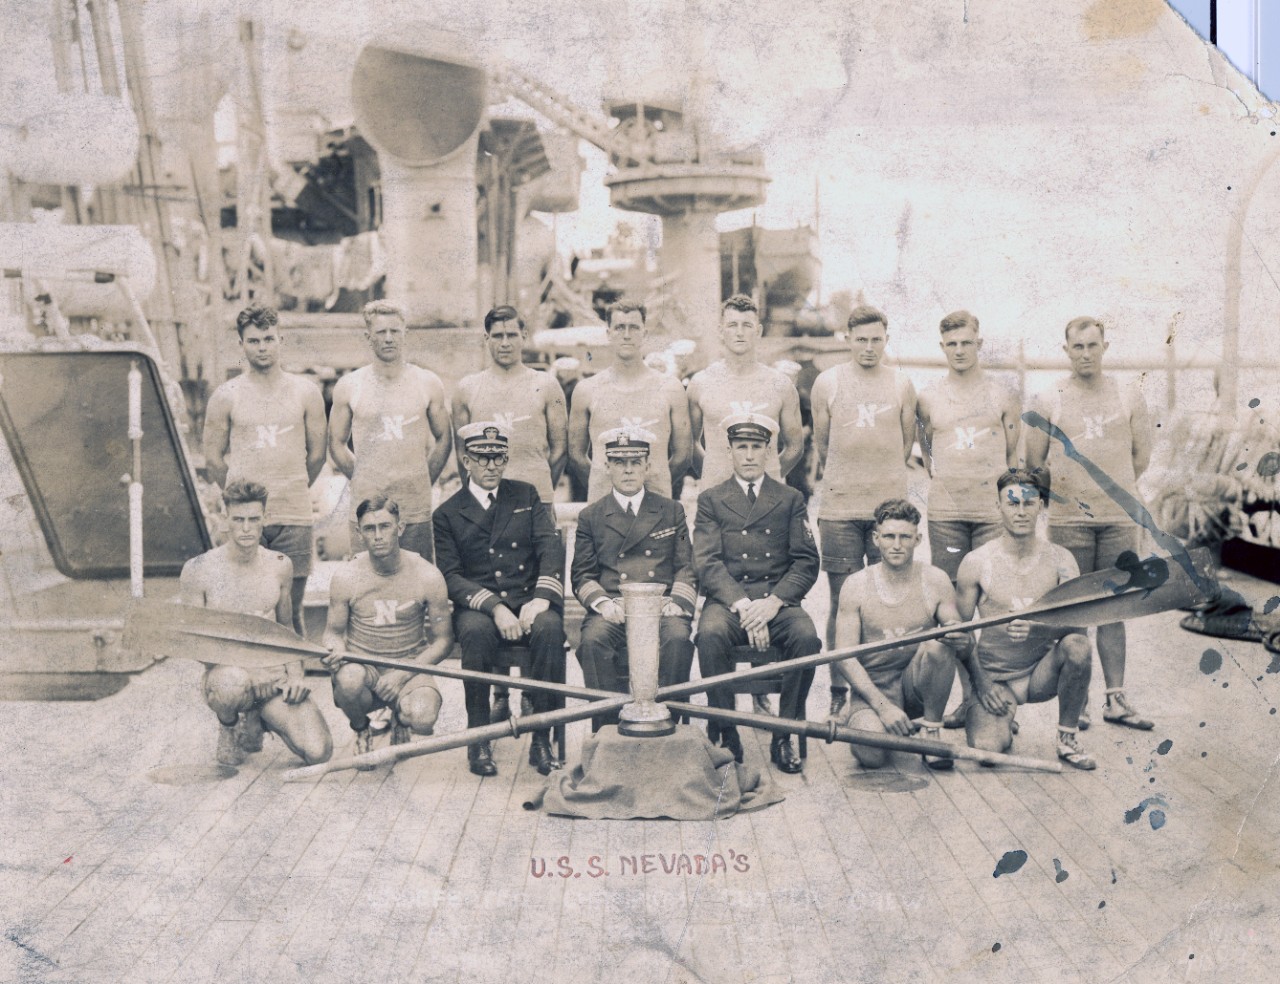 Collection of two photos related to USS Nevada (BB-36) taken in 1923 - one is a starboard broadside view of the ship and the other is the ship's Race Boat Crew (Fleet Champions 1921-1923) (officers identified include: CAPT J.M. Luby and CDR D.A. Scott). Both images are heavily damaged. 